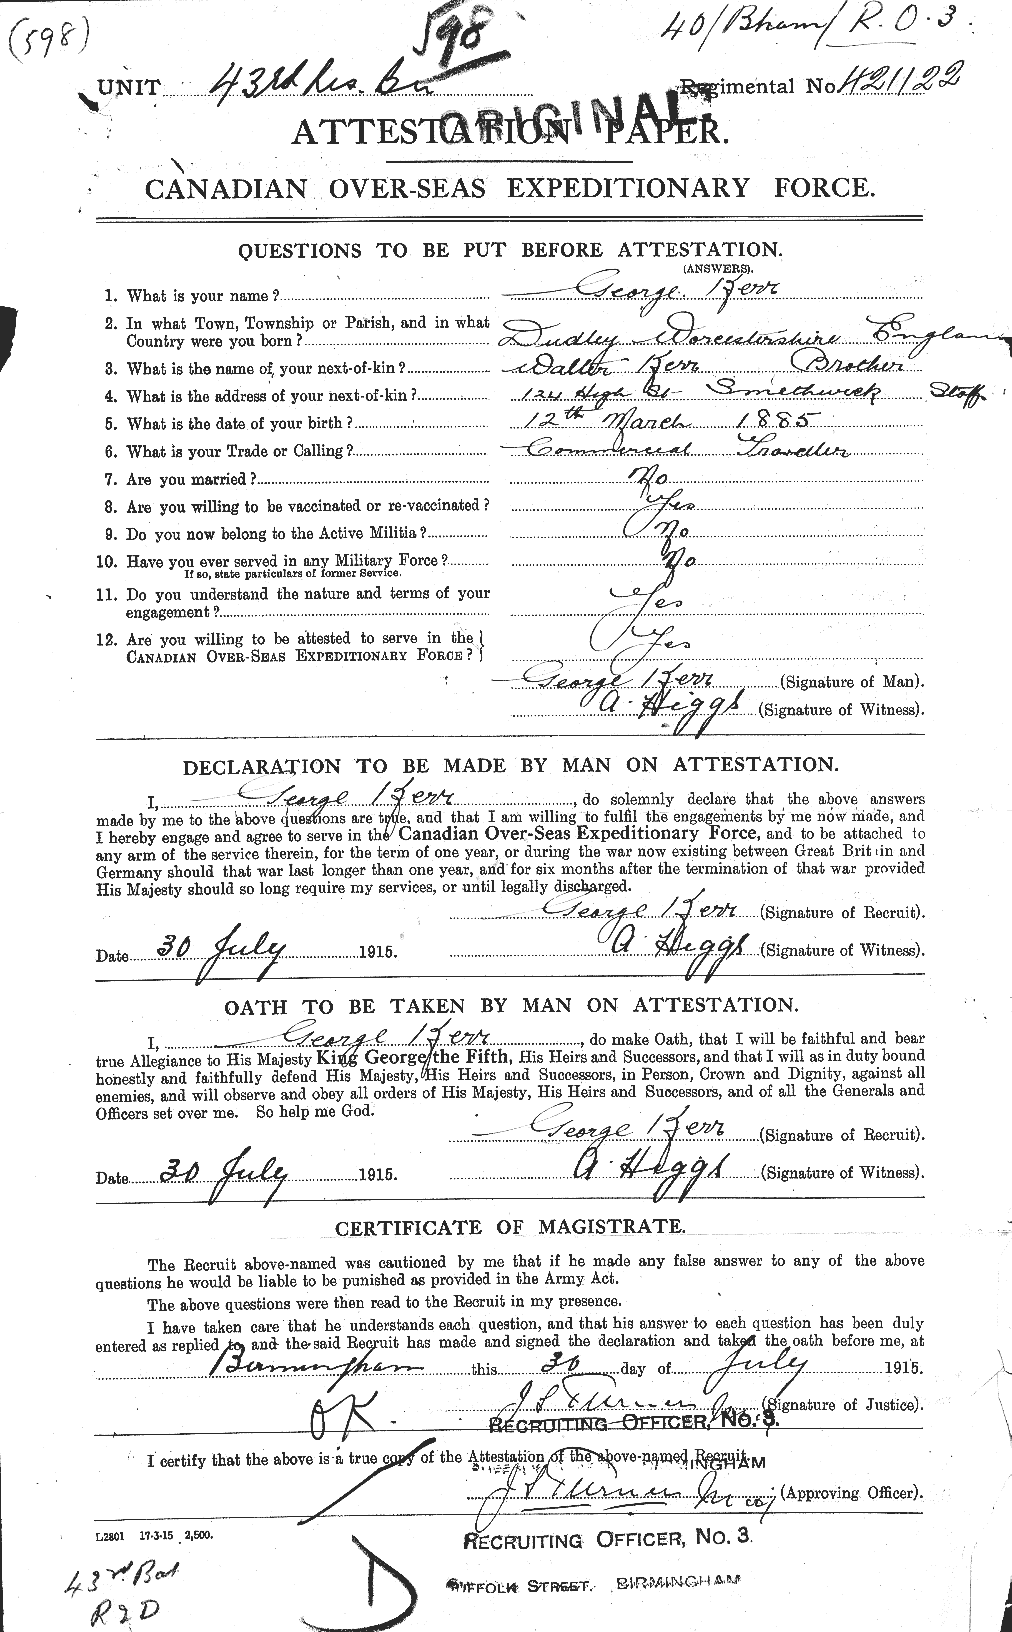 Personnel Records of the First World War - CEF 431922a